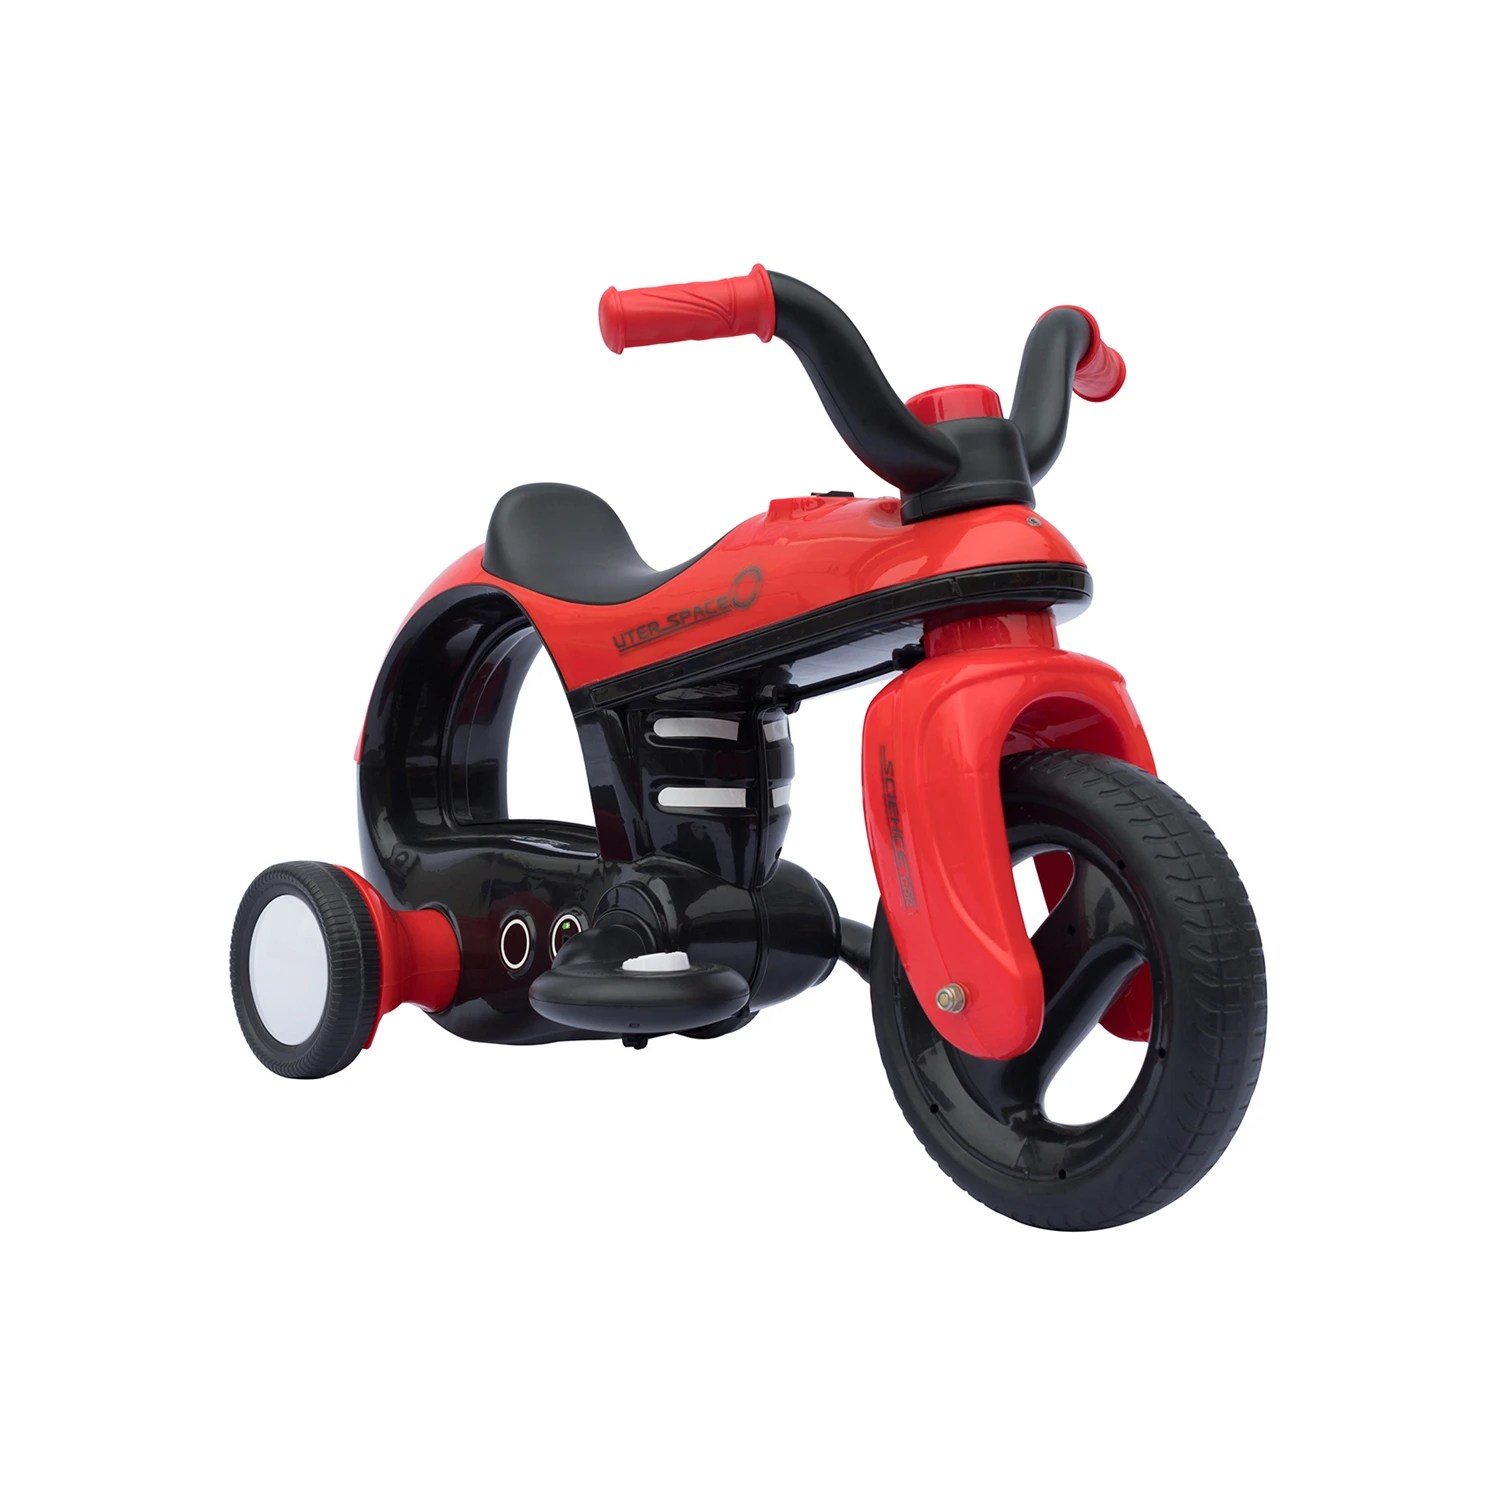 

Cute Design Child Electric Motorcycle With 3 Wheels Red Electric Ride On Car For Girls White Yellow Kids Battery Powered Toy Car